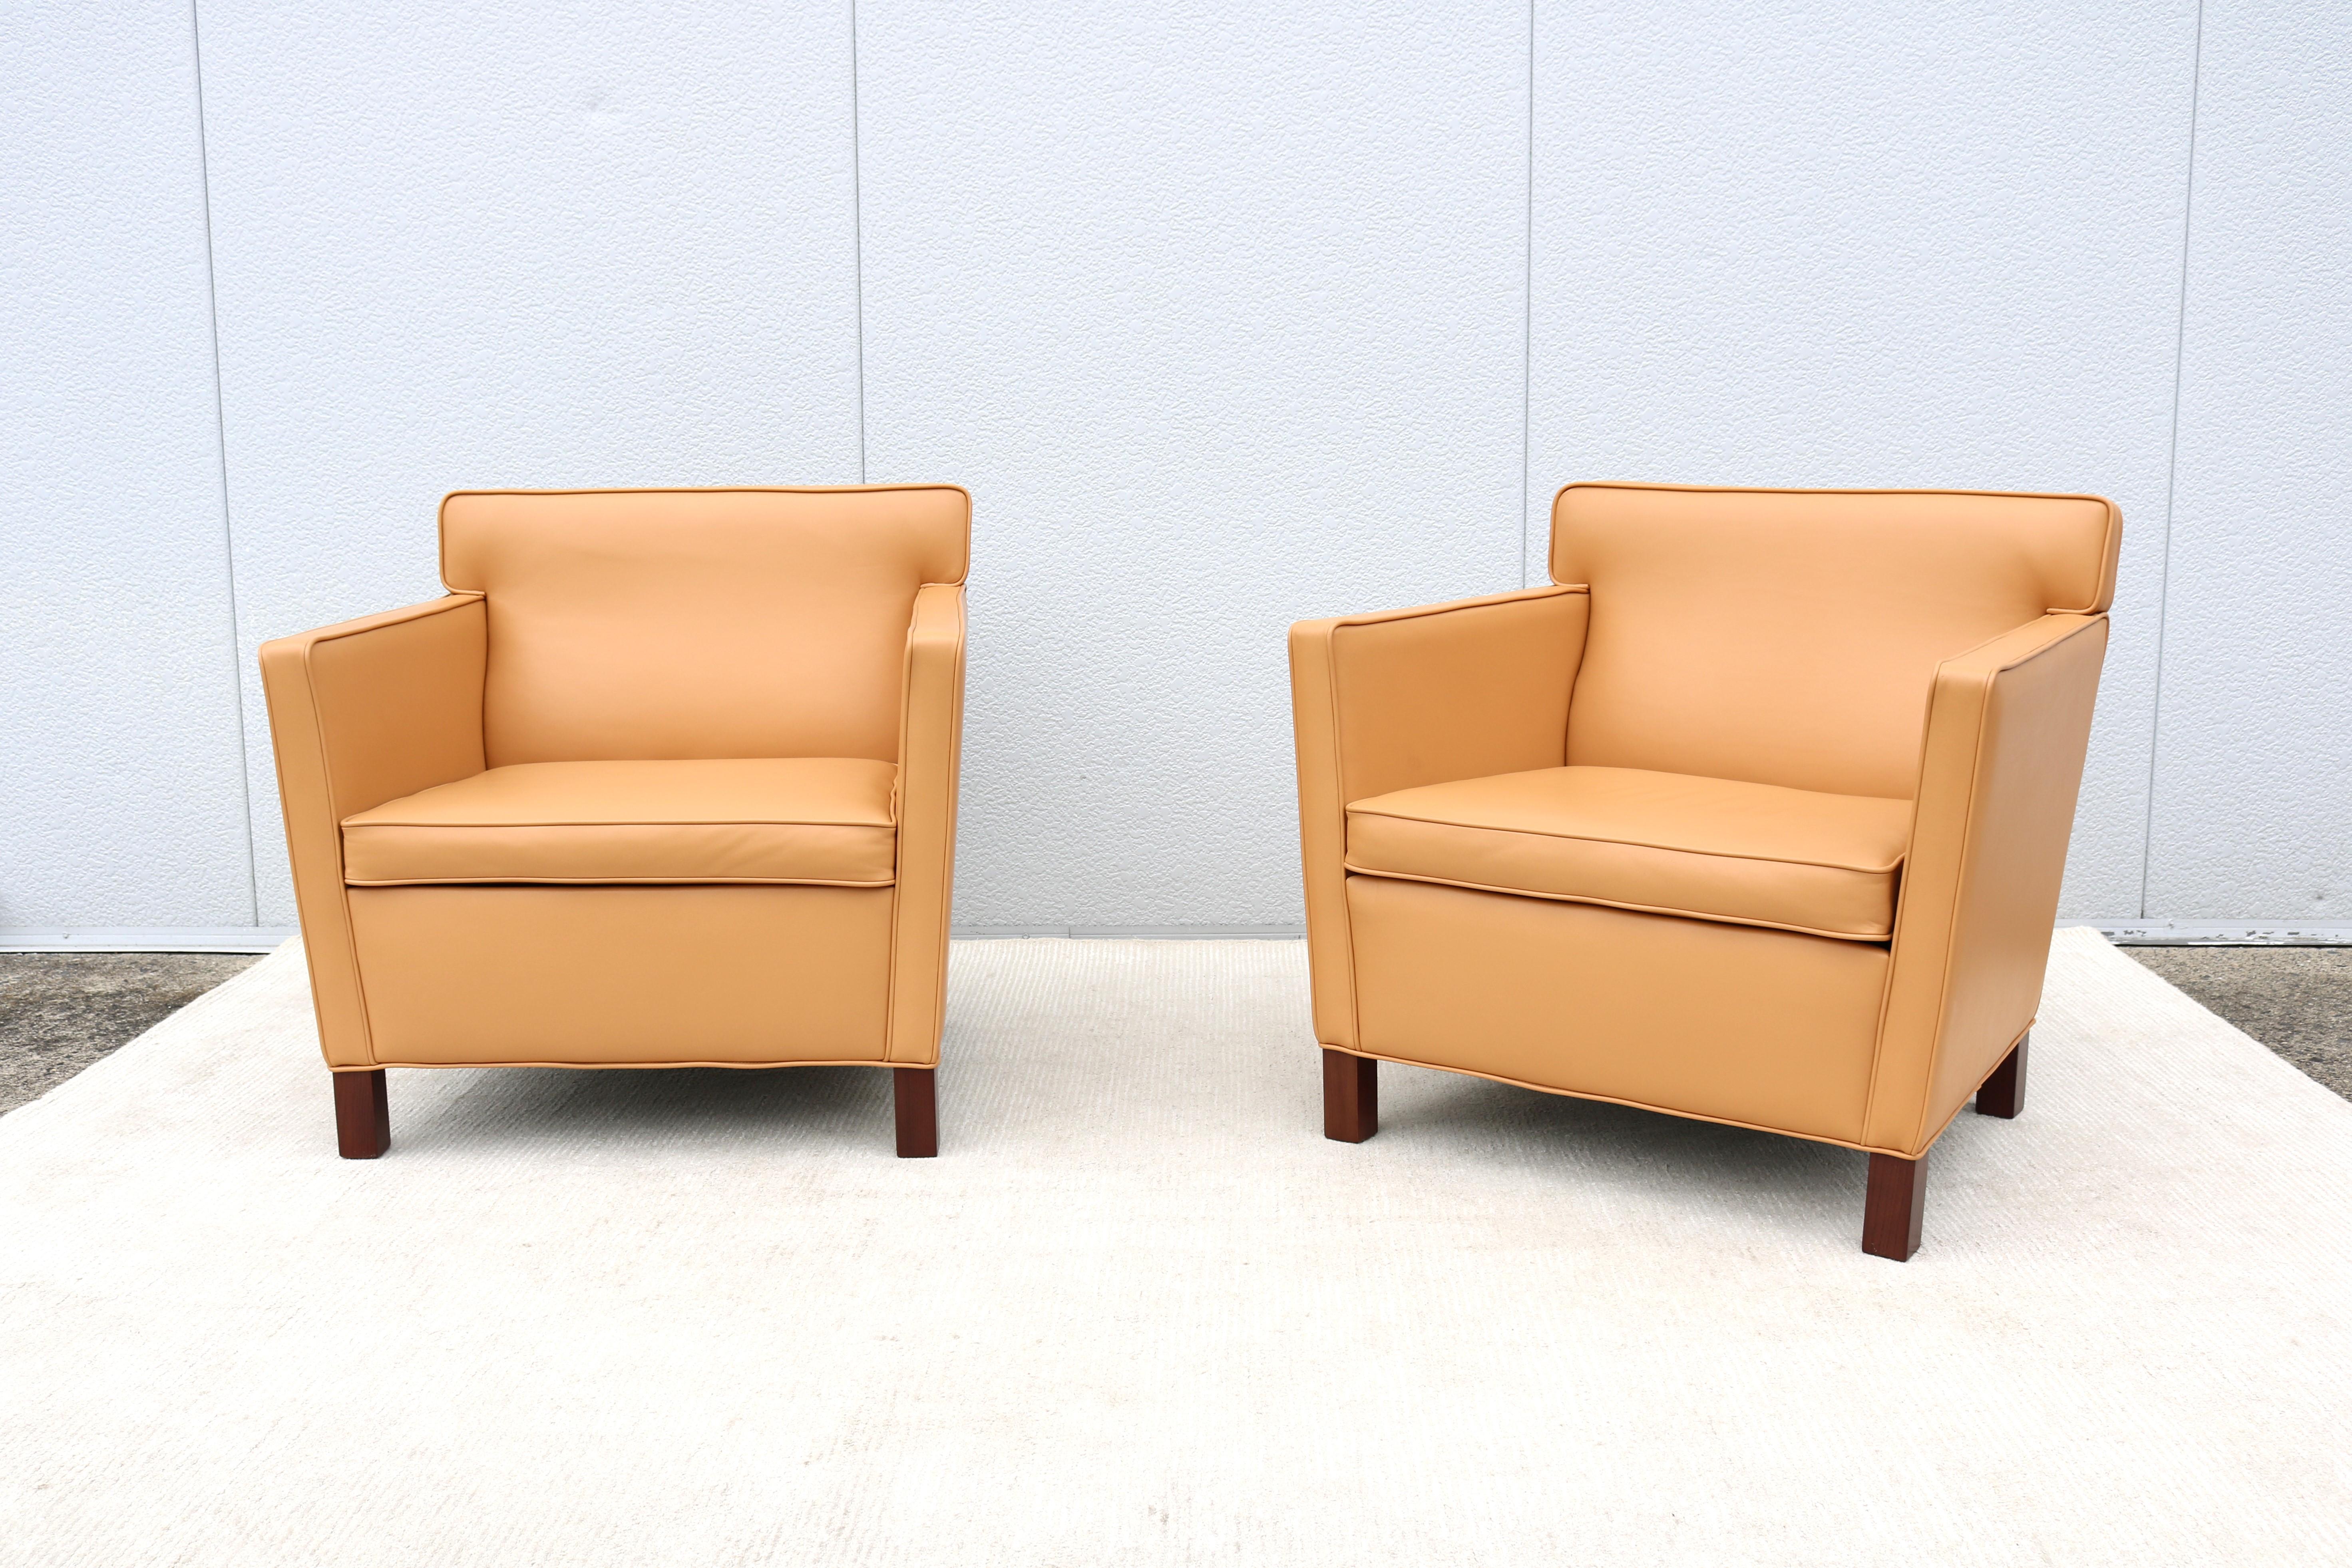 Contemporary Mid-Century Modern Ludwig Mies van der Rohe for Knoll Krefeld Lounge Chairs Pair For Sale